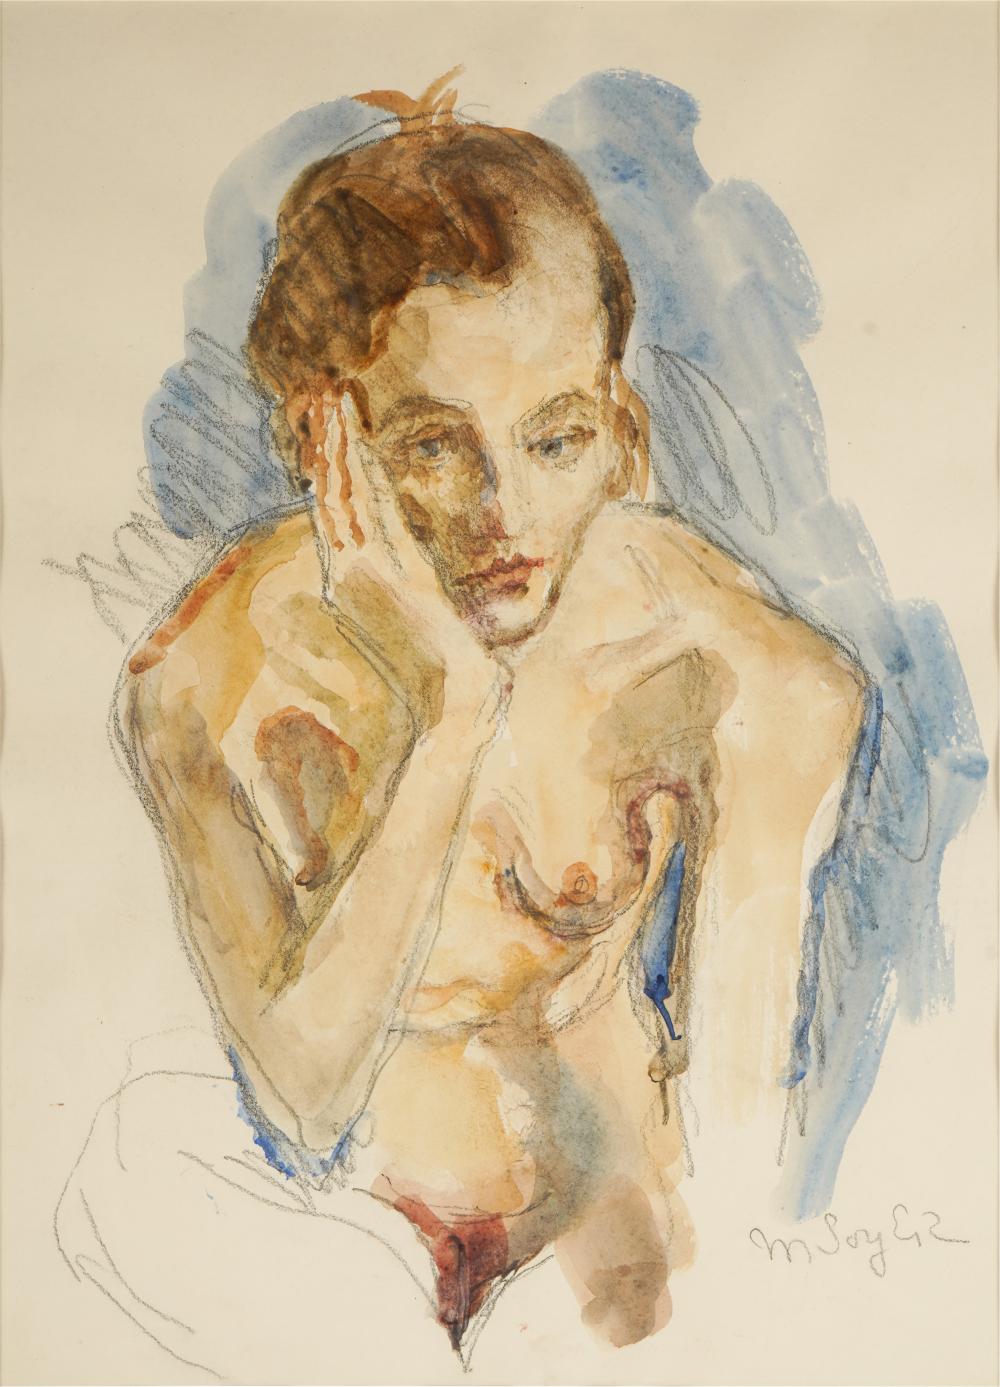 MOSES SOYER (1899 - 1974): THOUGHTFUL